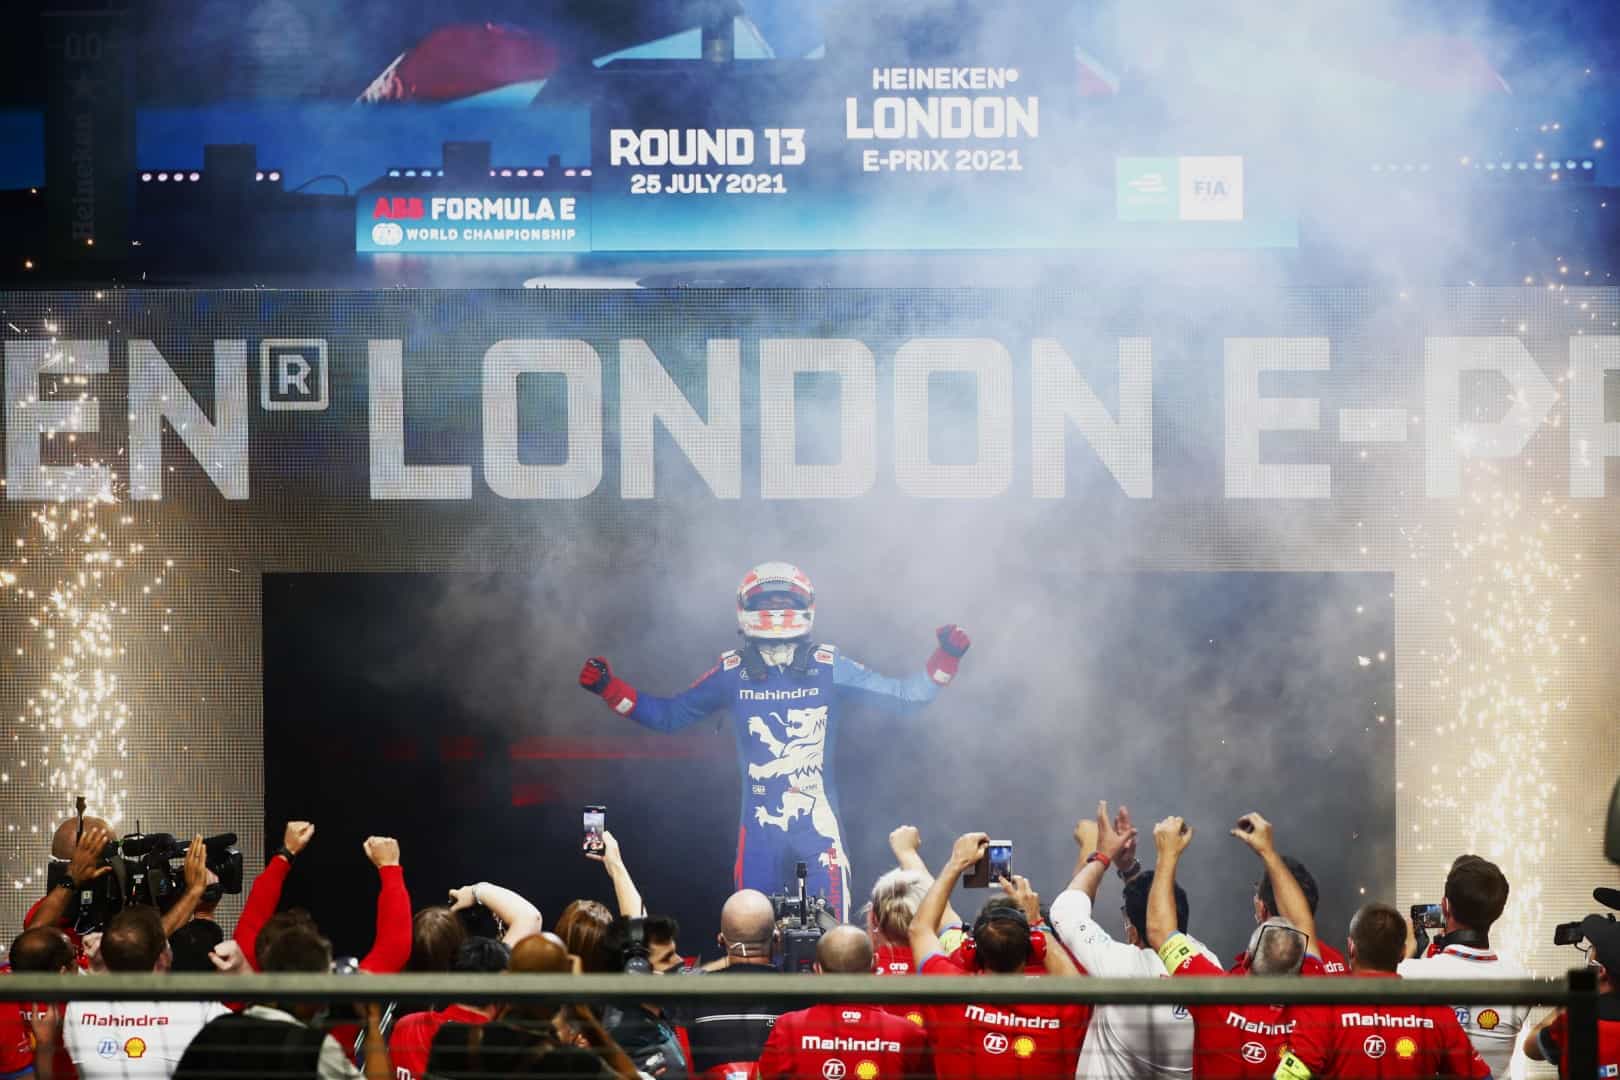 STREETS OF LONDON, UNITED KINGDOM - JULY 25: Alex Lynn (GBR), Mahindra Racing, 1st position, celebrates on arrival at the podium during the London E-Prix II at Streets of London on Sunday July 25, 2021, United Kingdom. (Photo by Sam Bloxham / LAT Images)